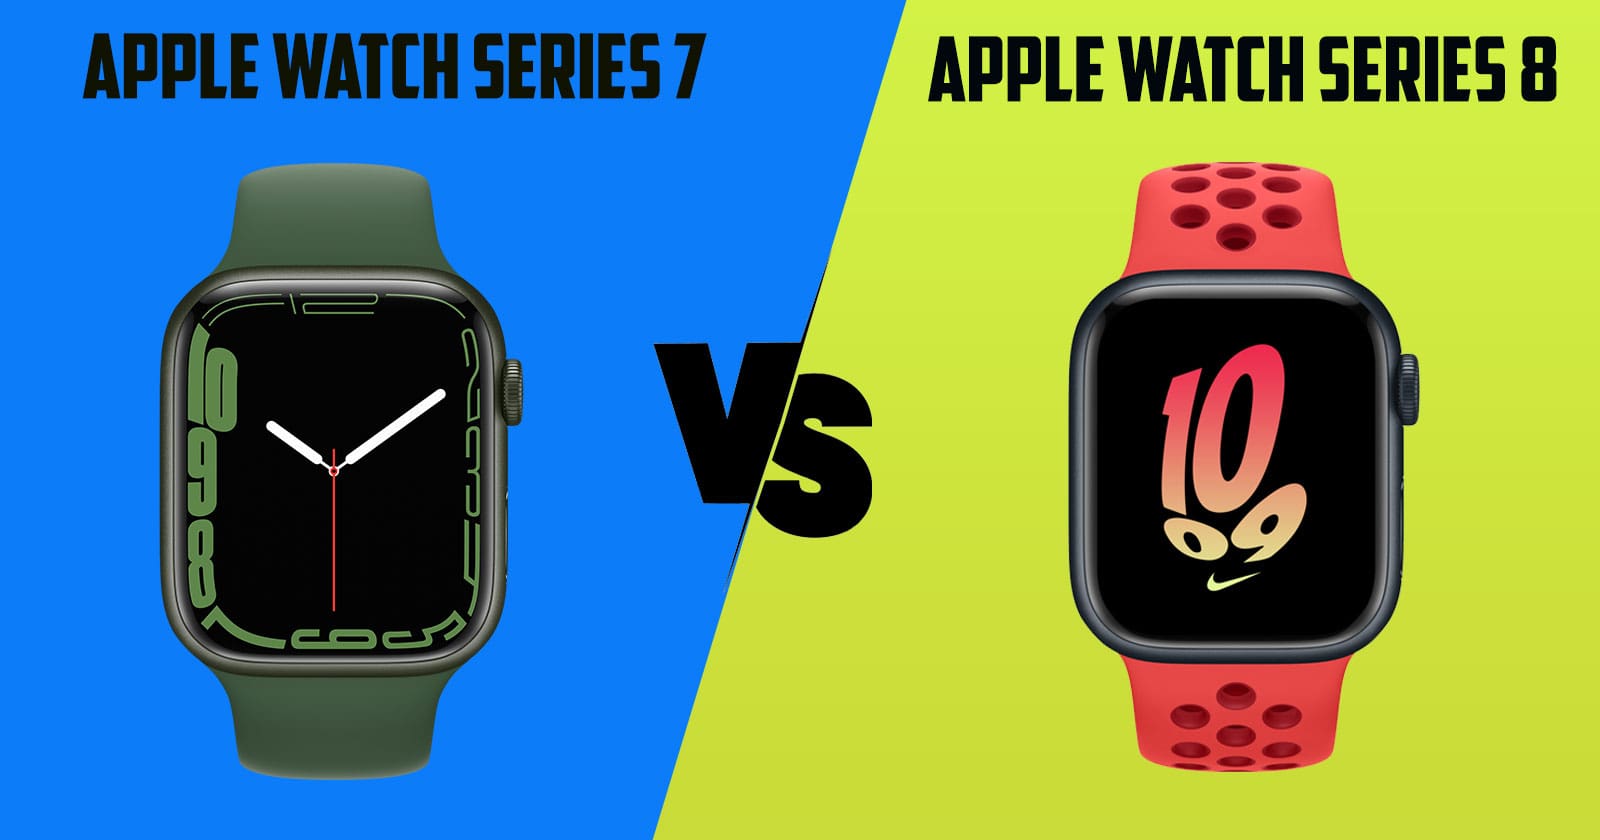 What Is the Difference Between Apple Watch Series 7 and 8